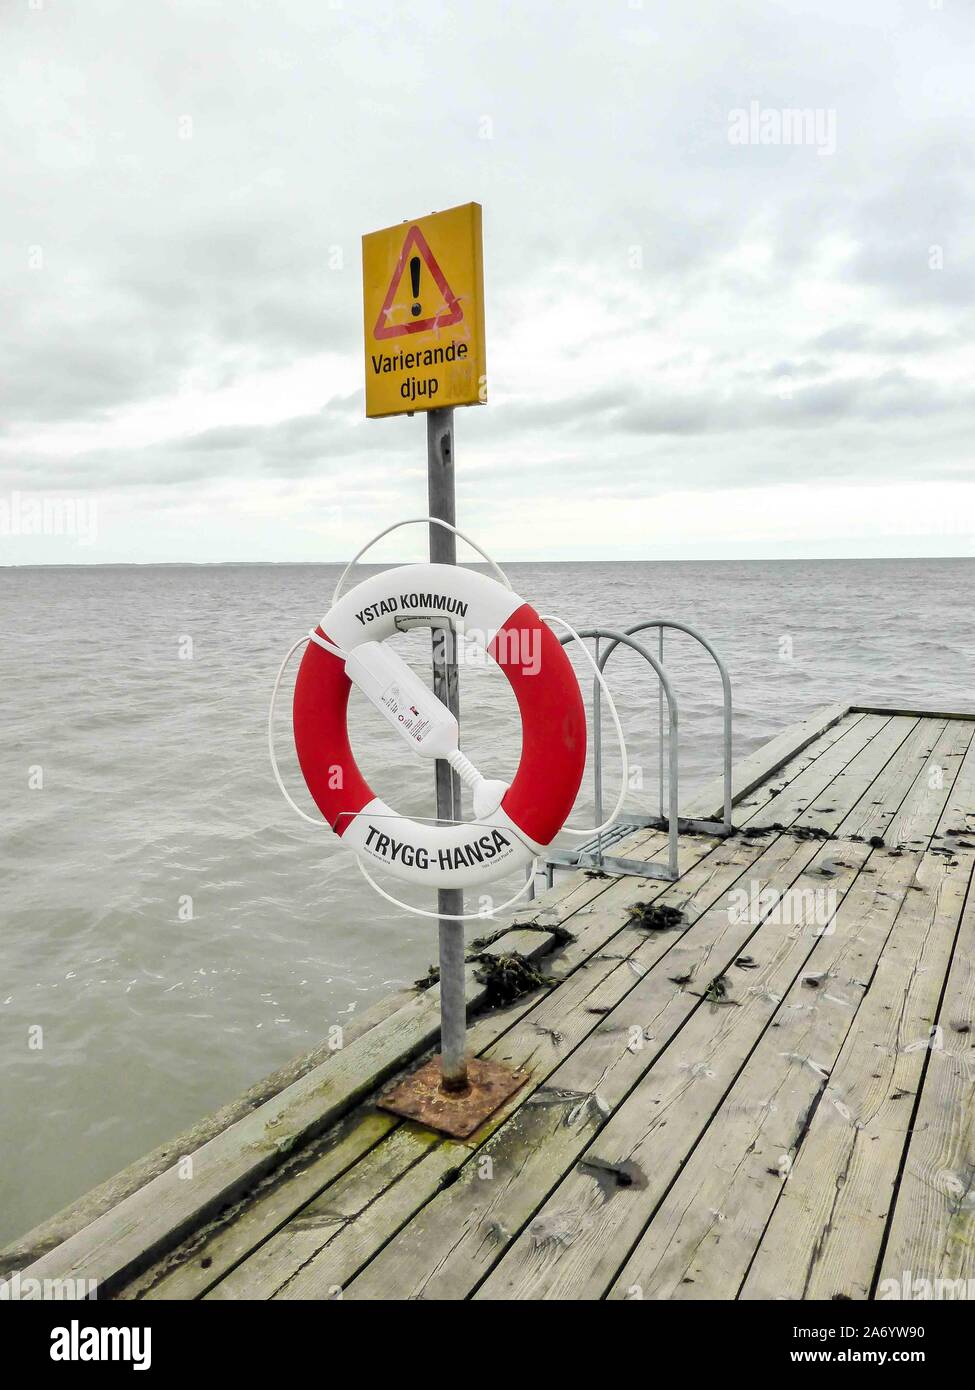 Seaside dock in Ystad, Sweden with red and white lifesaver ring mounted on a pole. Stock Photo